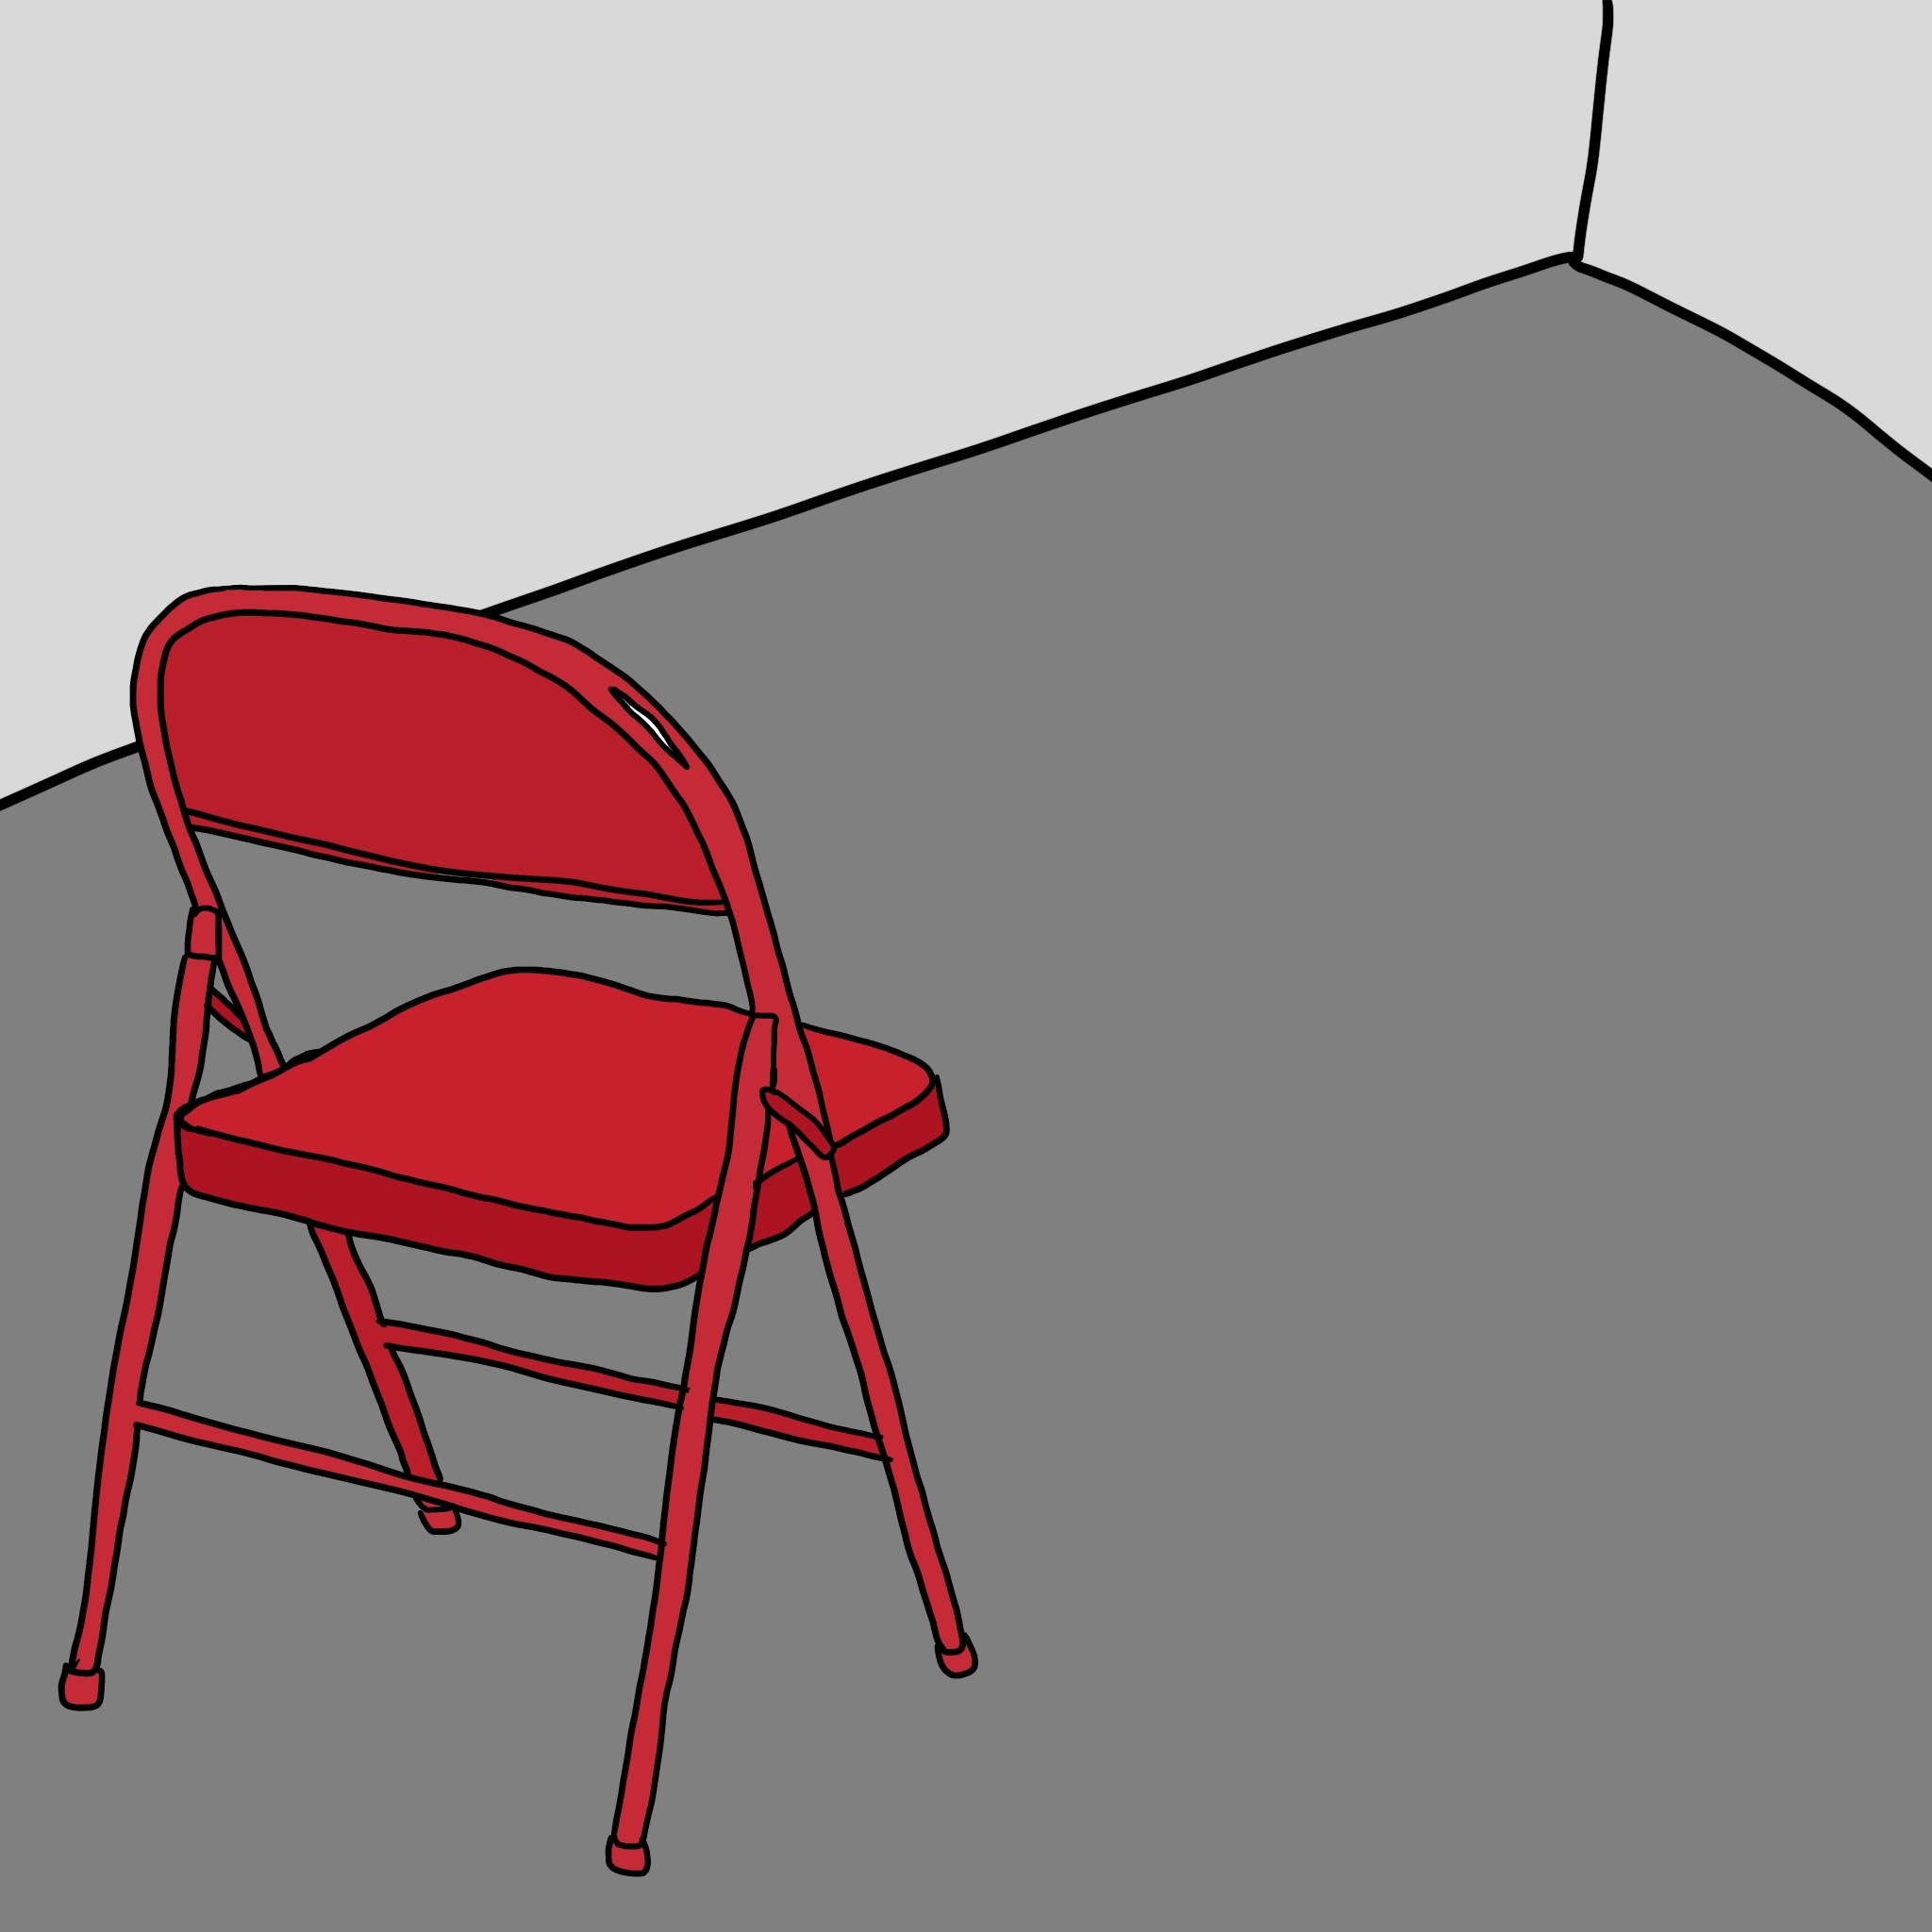 A single red steel folding chair